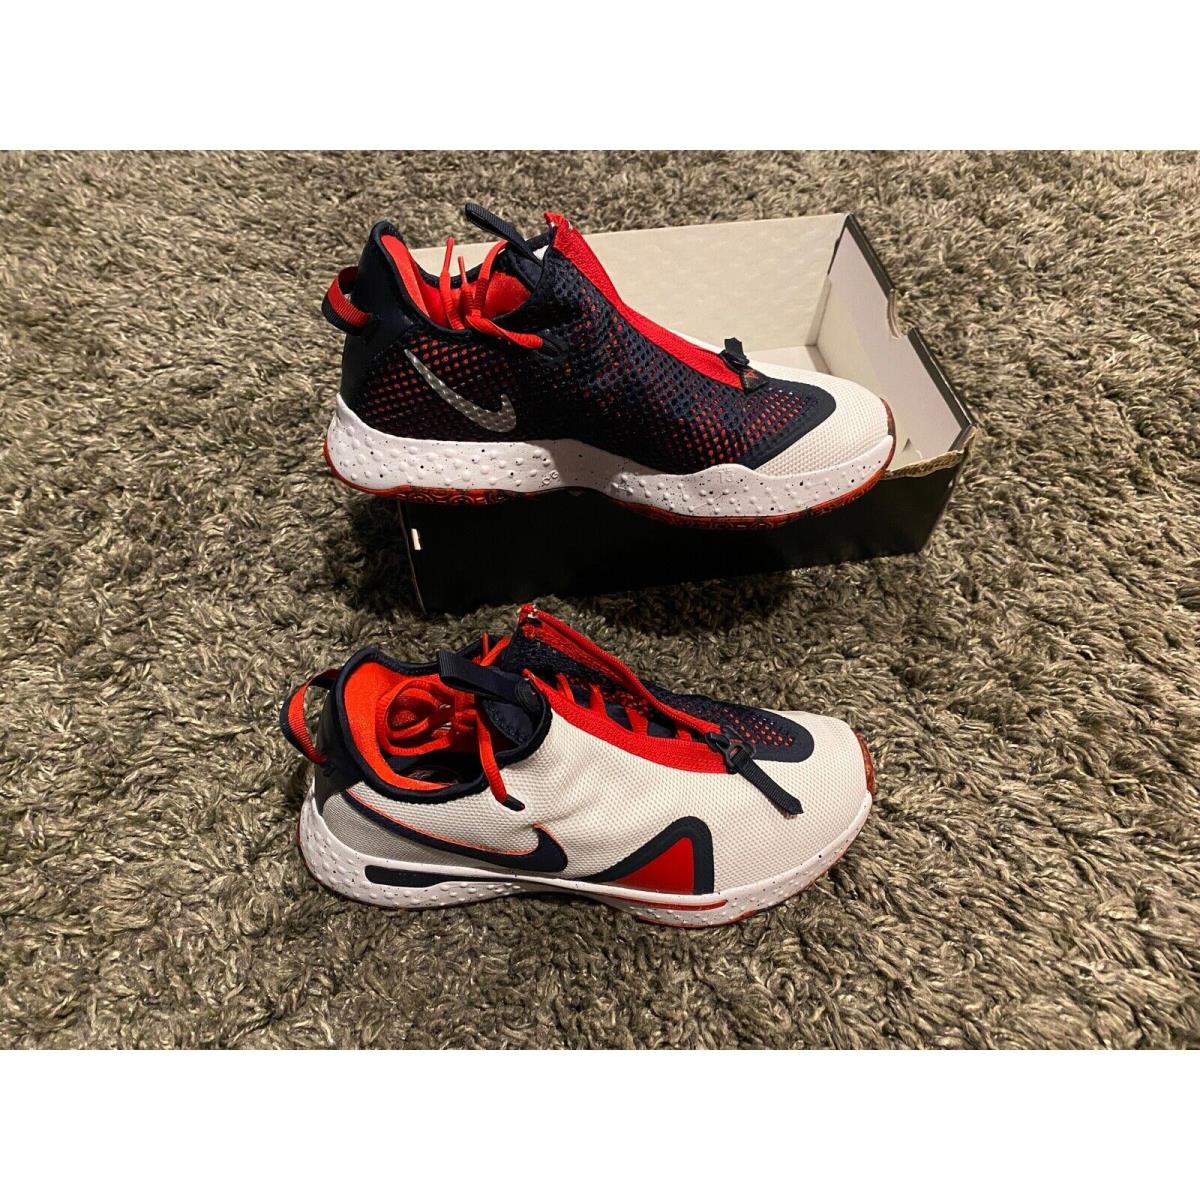 Nike PG4 Paul George Basketball Shoes LA Clippers 10 White University Red Blue